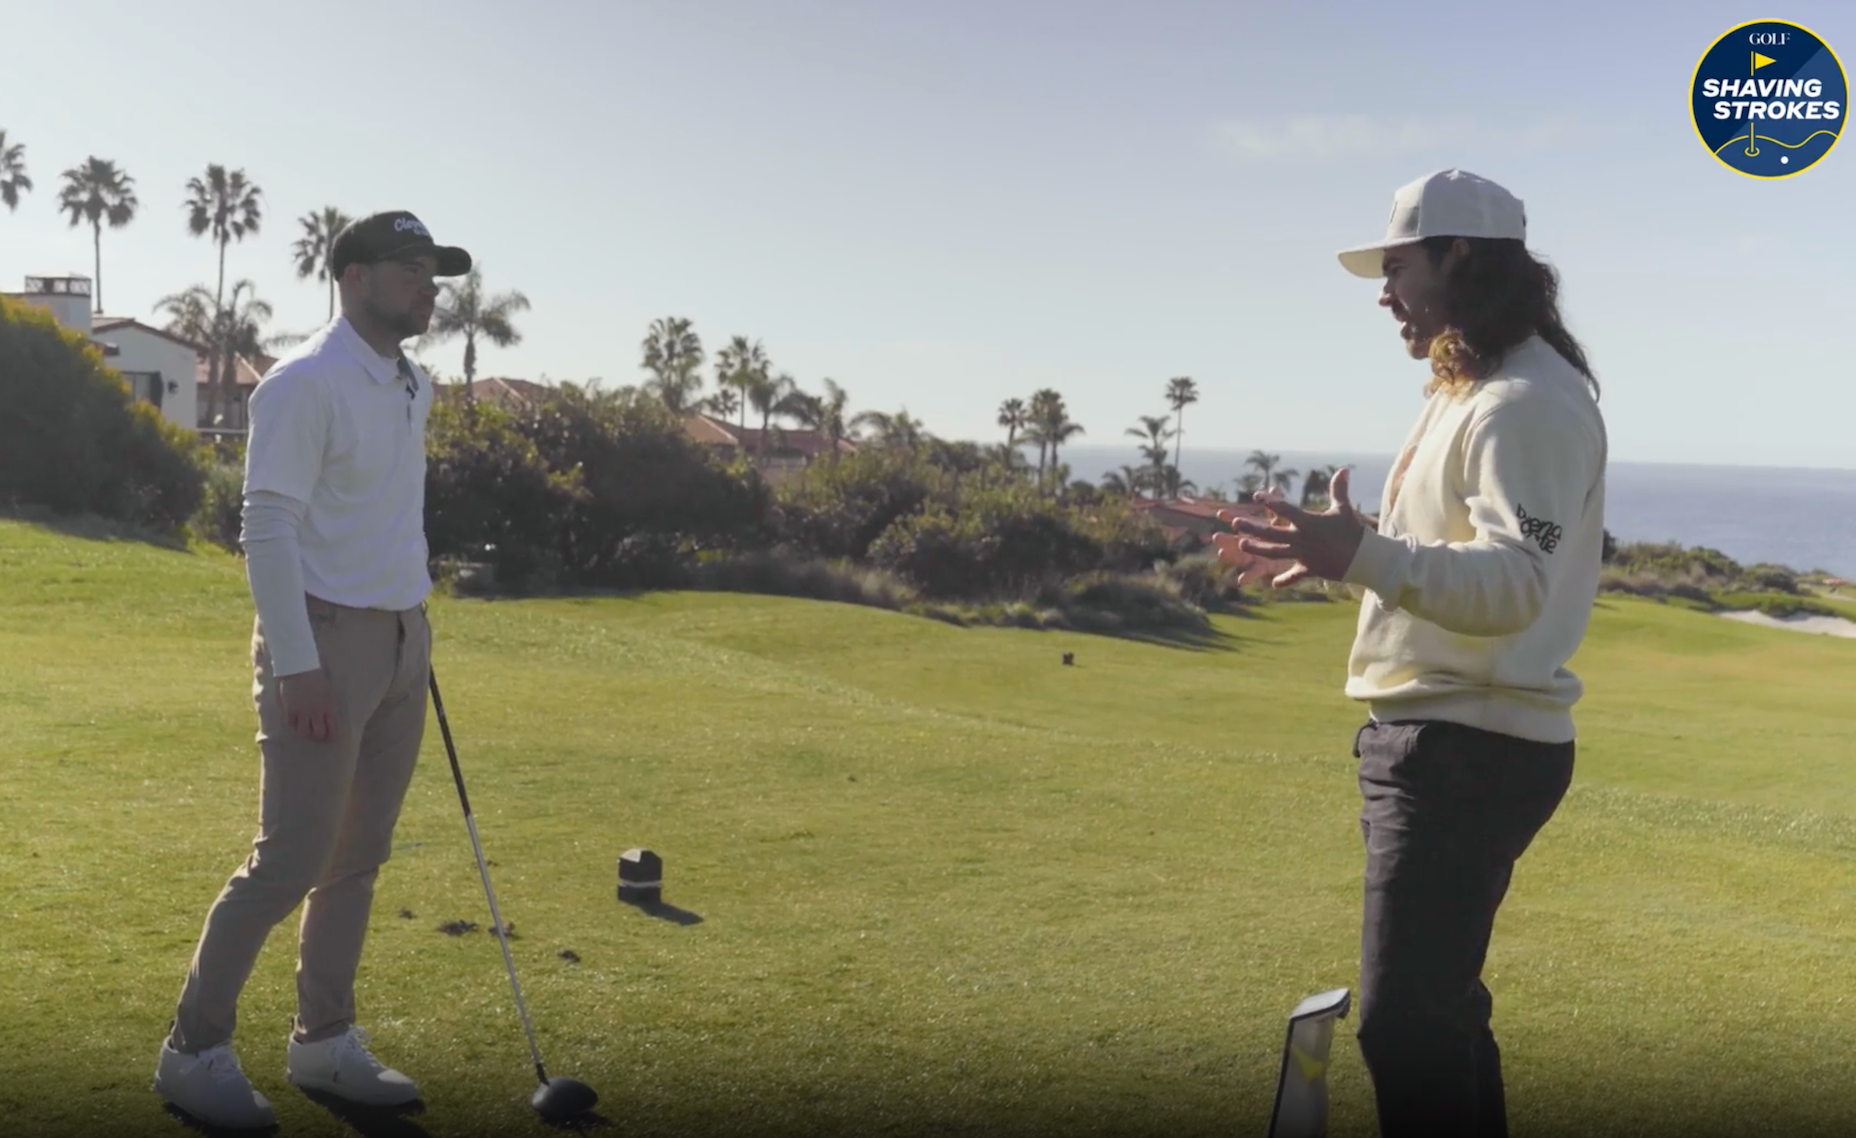 Cleveland Golf ambassador Jake Hutt shares 2 easy things every player can do in order to hit driver farther with more accuracy